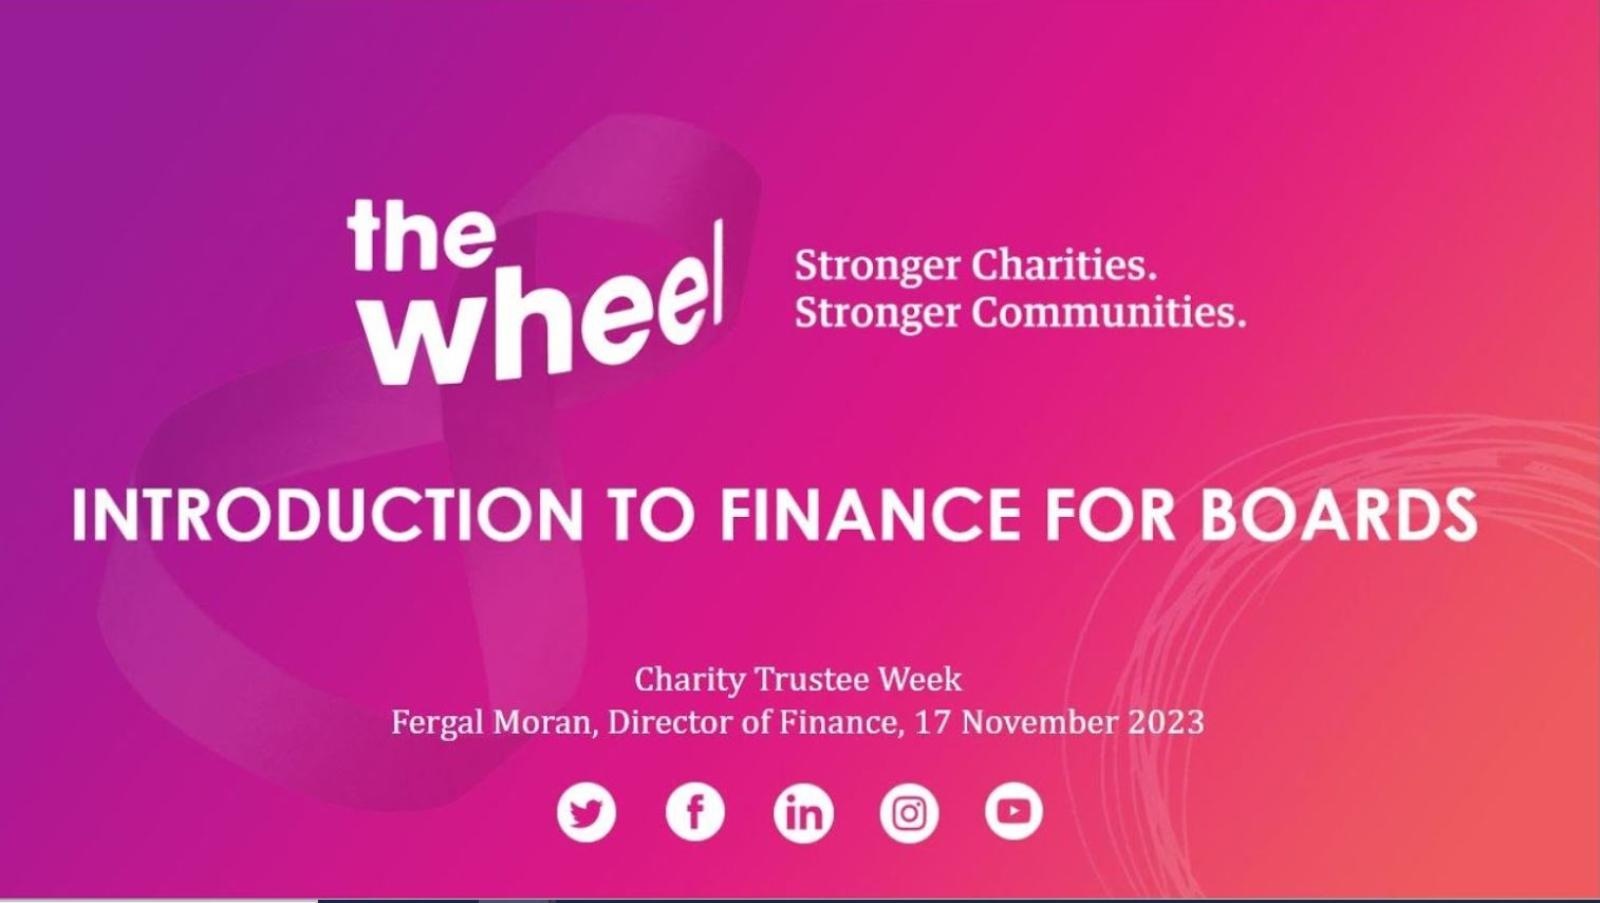 An Introduction to Finance for Boards - Charity Trustees' Week (17 November 2023)